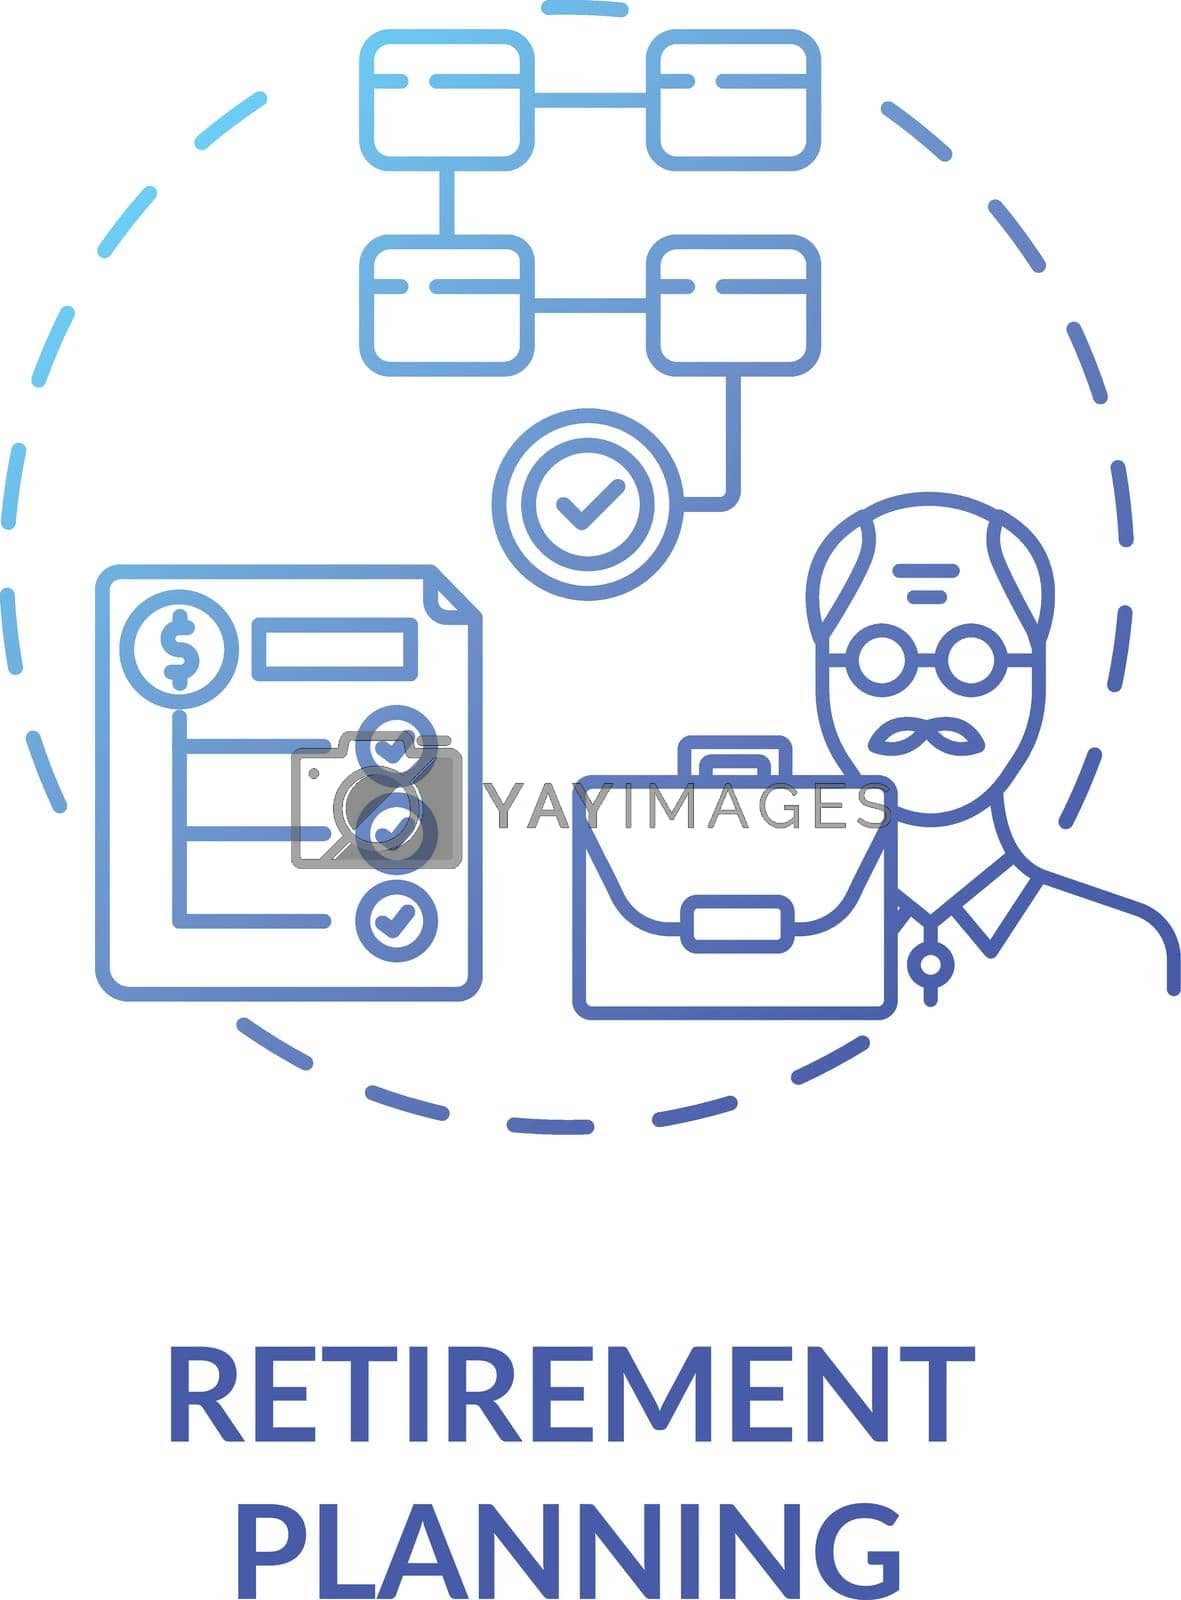 Retirement planning concept icon. Wealthy lifestyle advices. Money increasing planning. Life financial freedom idea thin line illustration. Vector isolated outline RGB color drawing